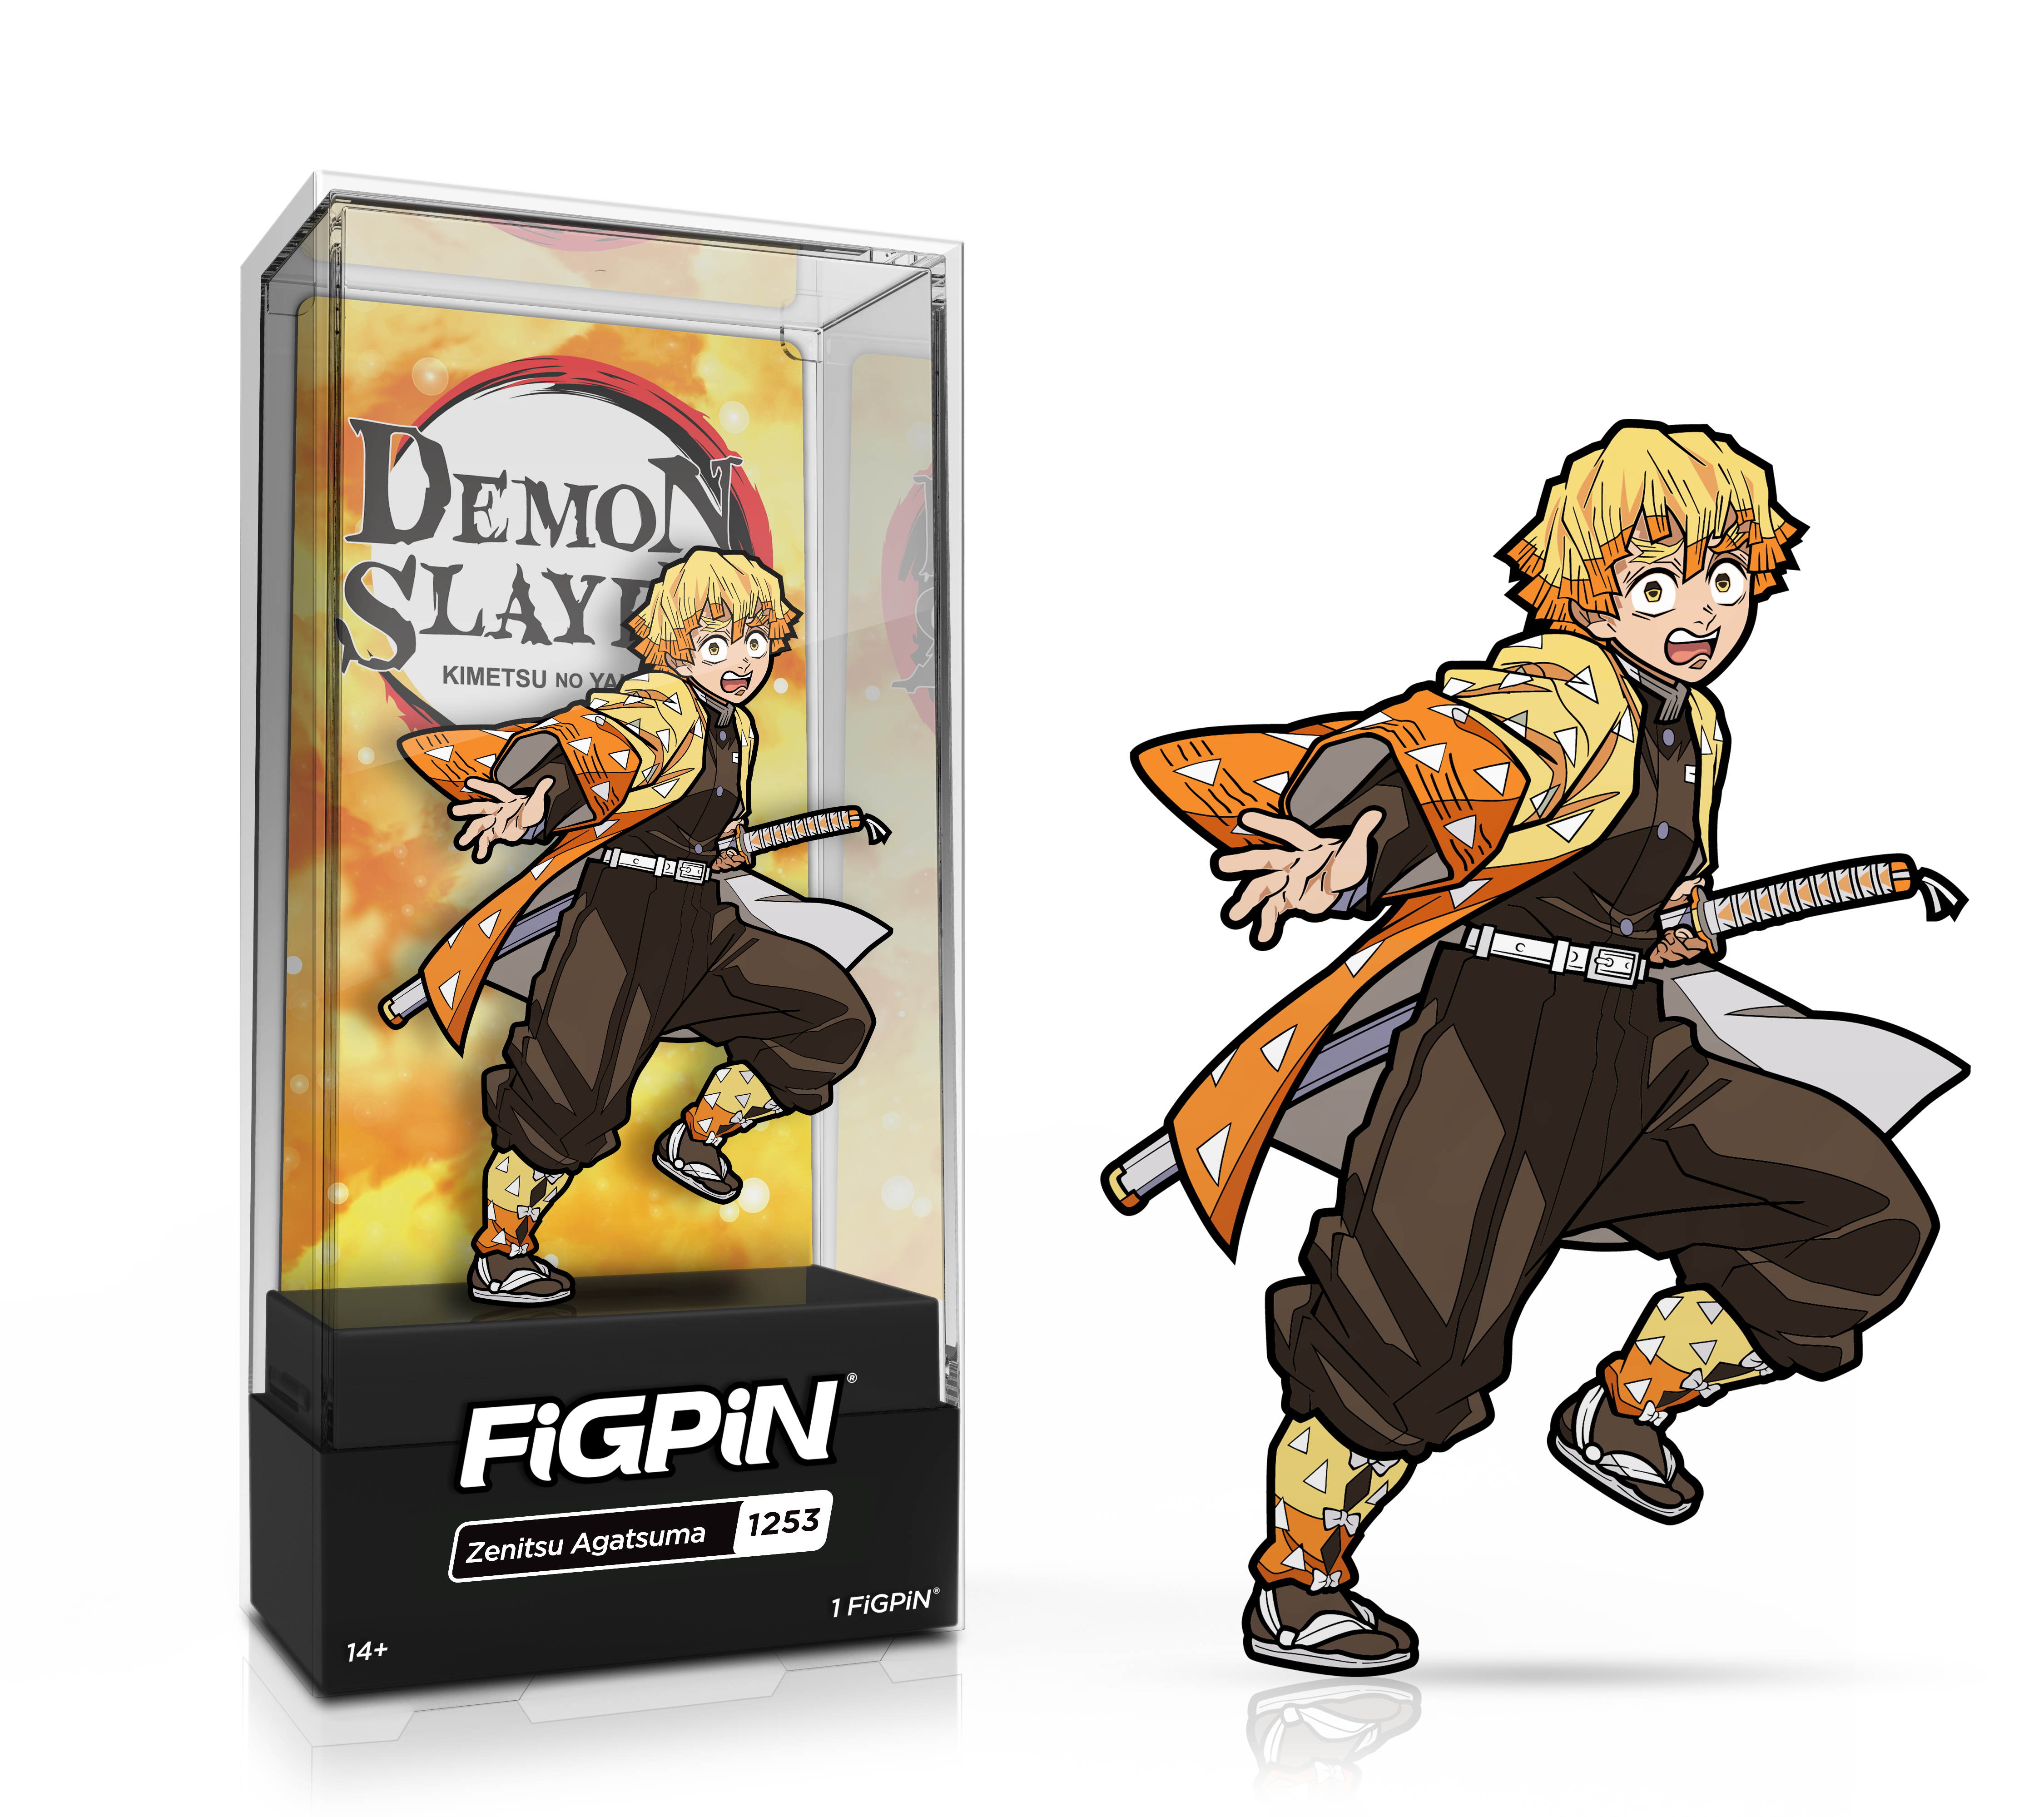 Side by side view of the Zenitsu Agatsuma enamel pin in display case and the art render.